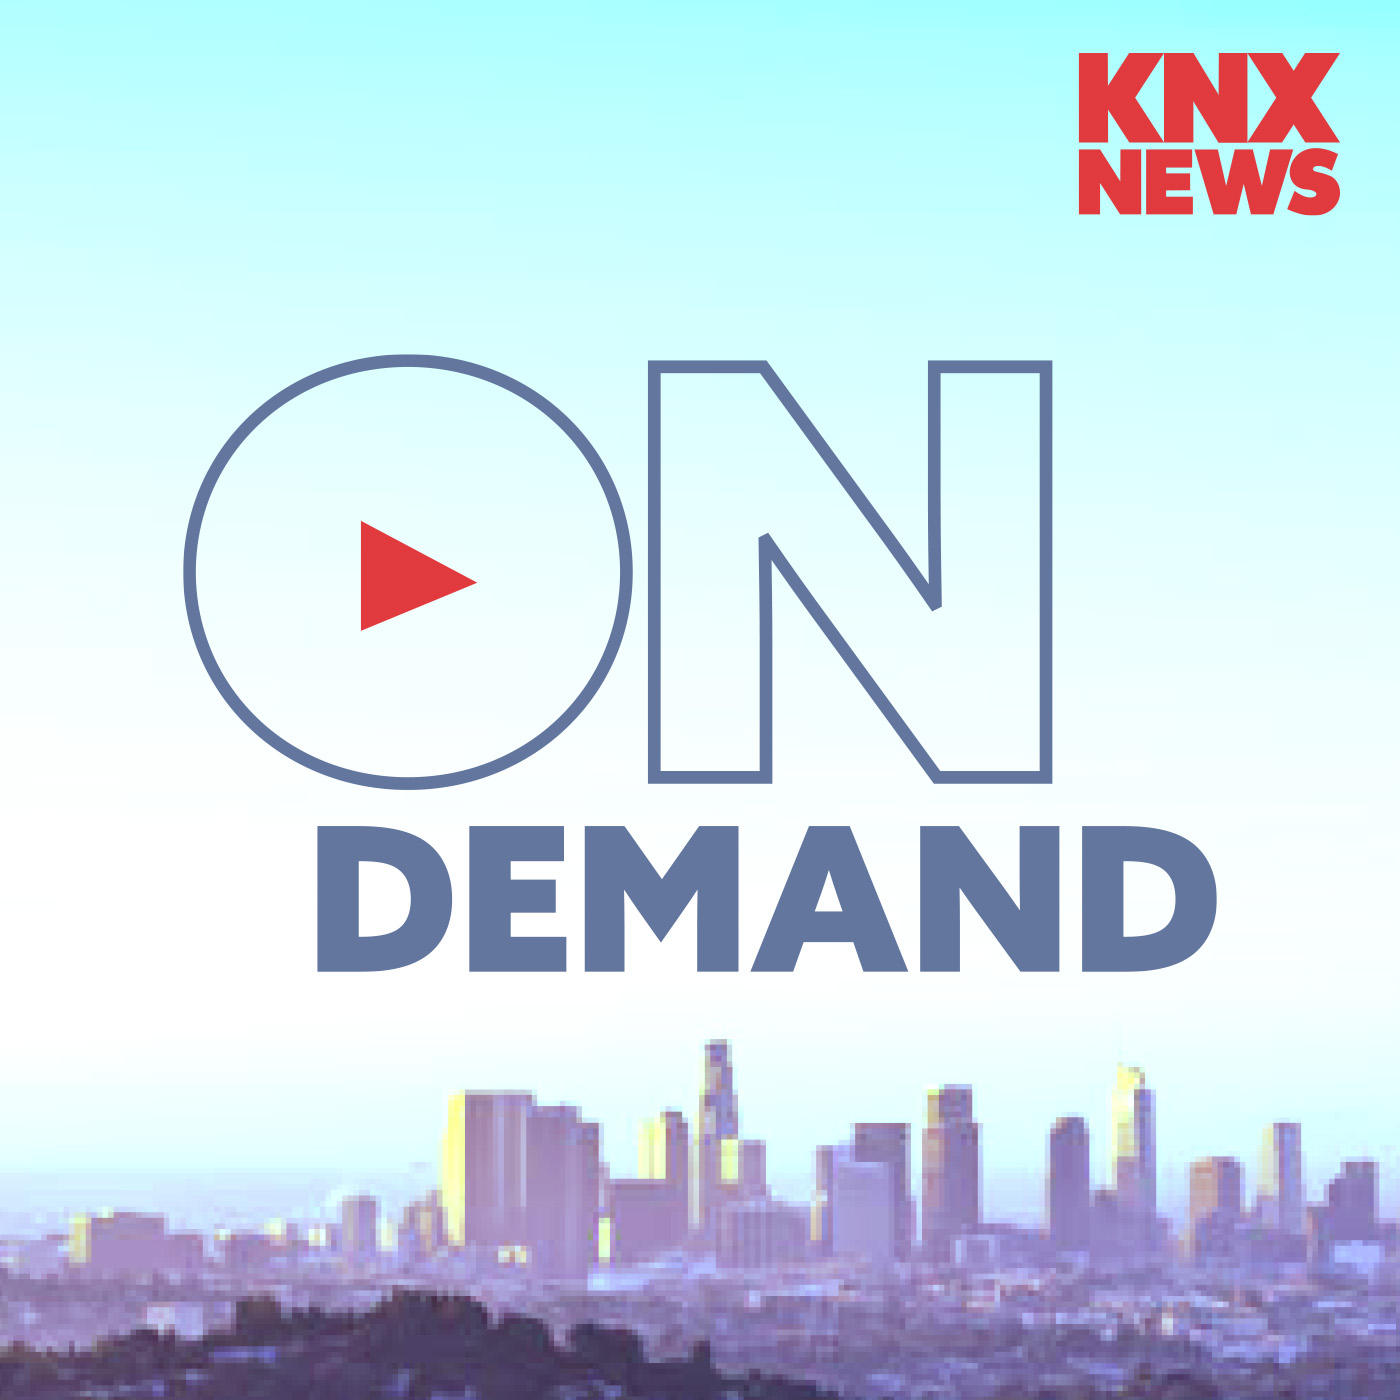 KNX BIG STORY: Are USC and other universities afraid of anti-Semitism accusations?